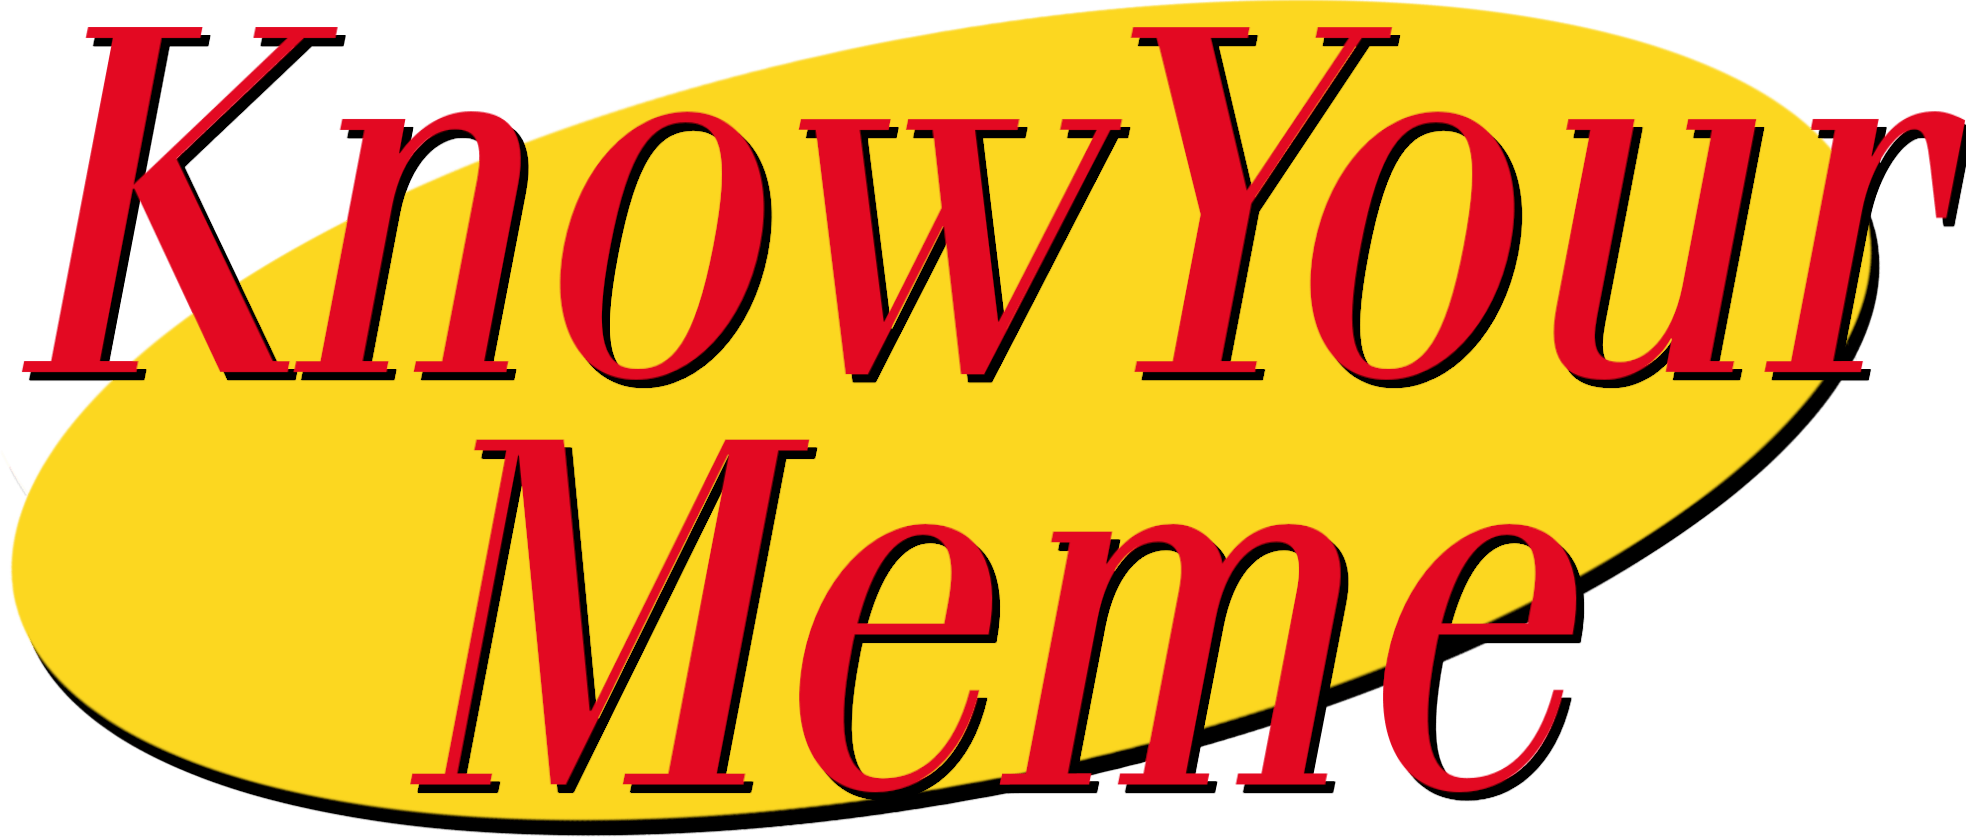 Seinfeld Logo - KnowYourMeme but it is a Seinfeld logo | KnowYourMeme | Know Your Meme